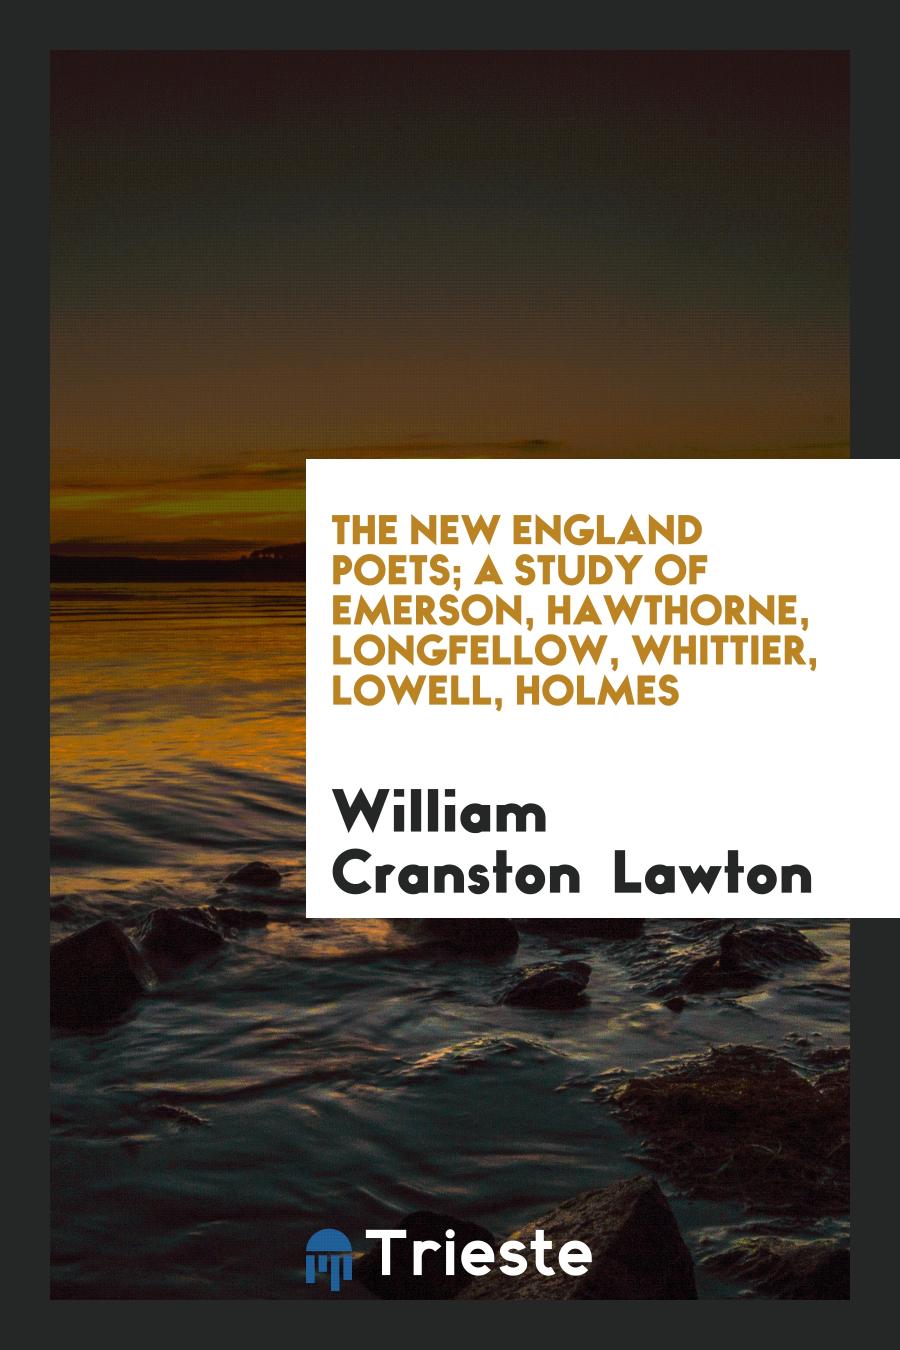 The New England Poets; A Study of Emerson, Hawthorne, Longfellow, Whittier, Lowell, Holmes